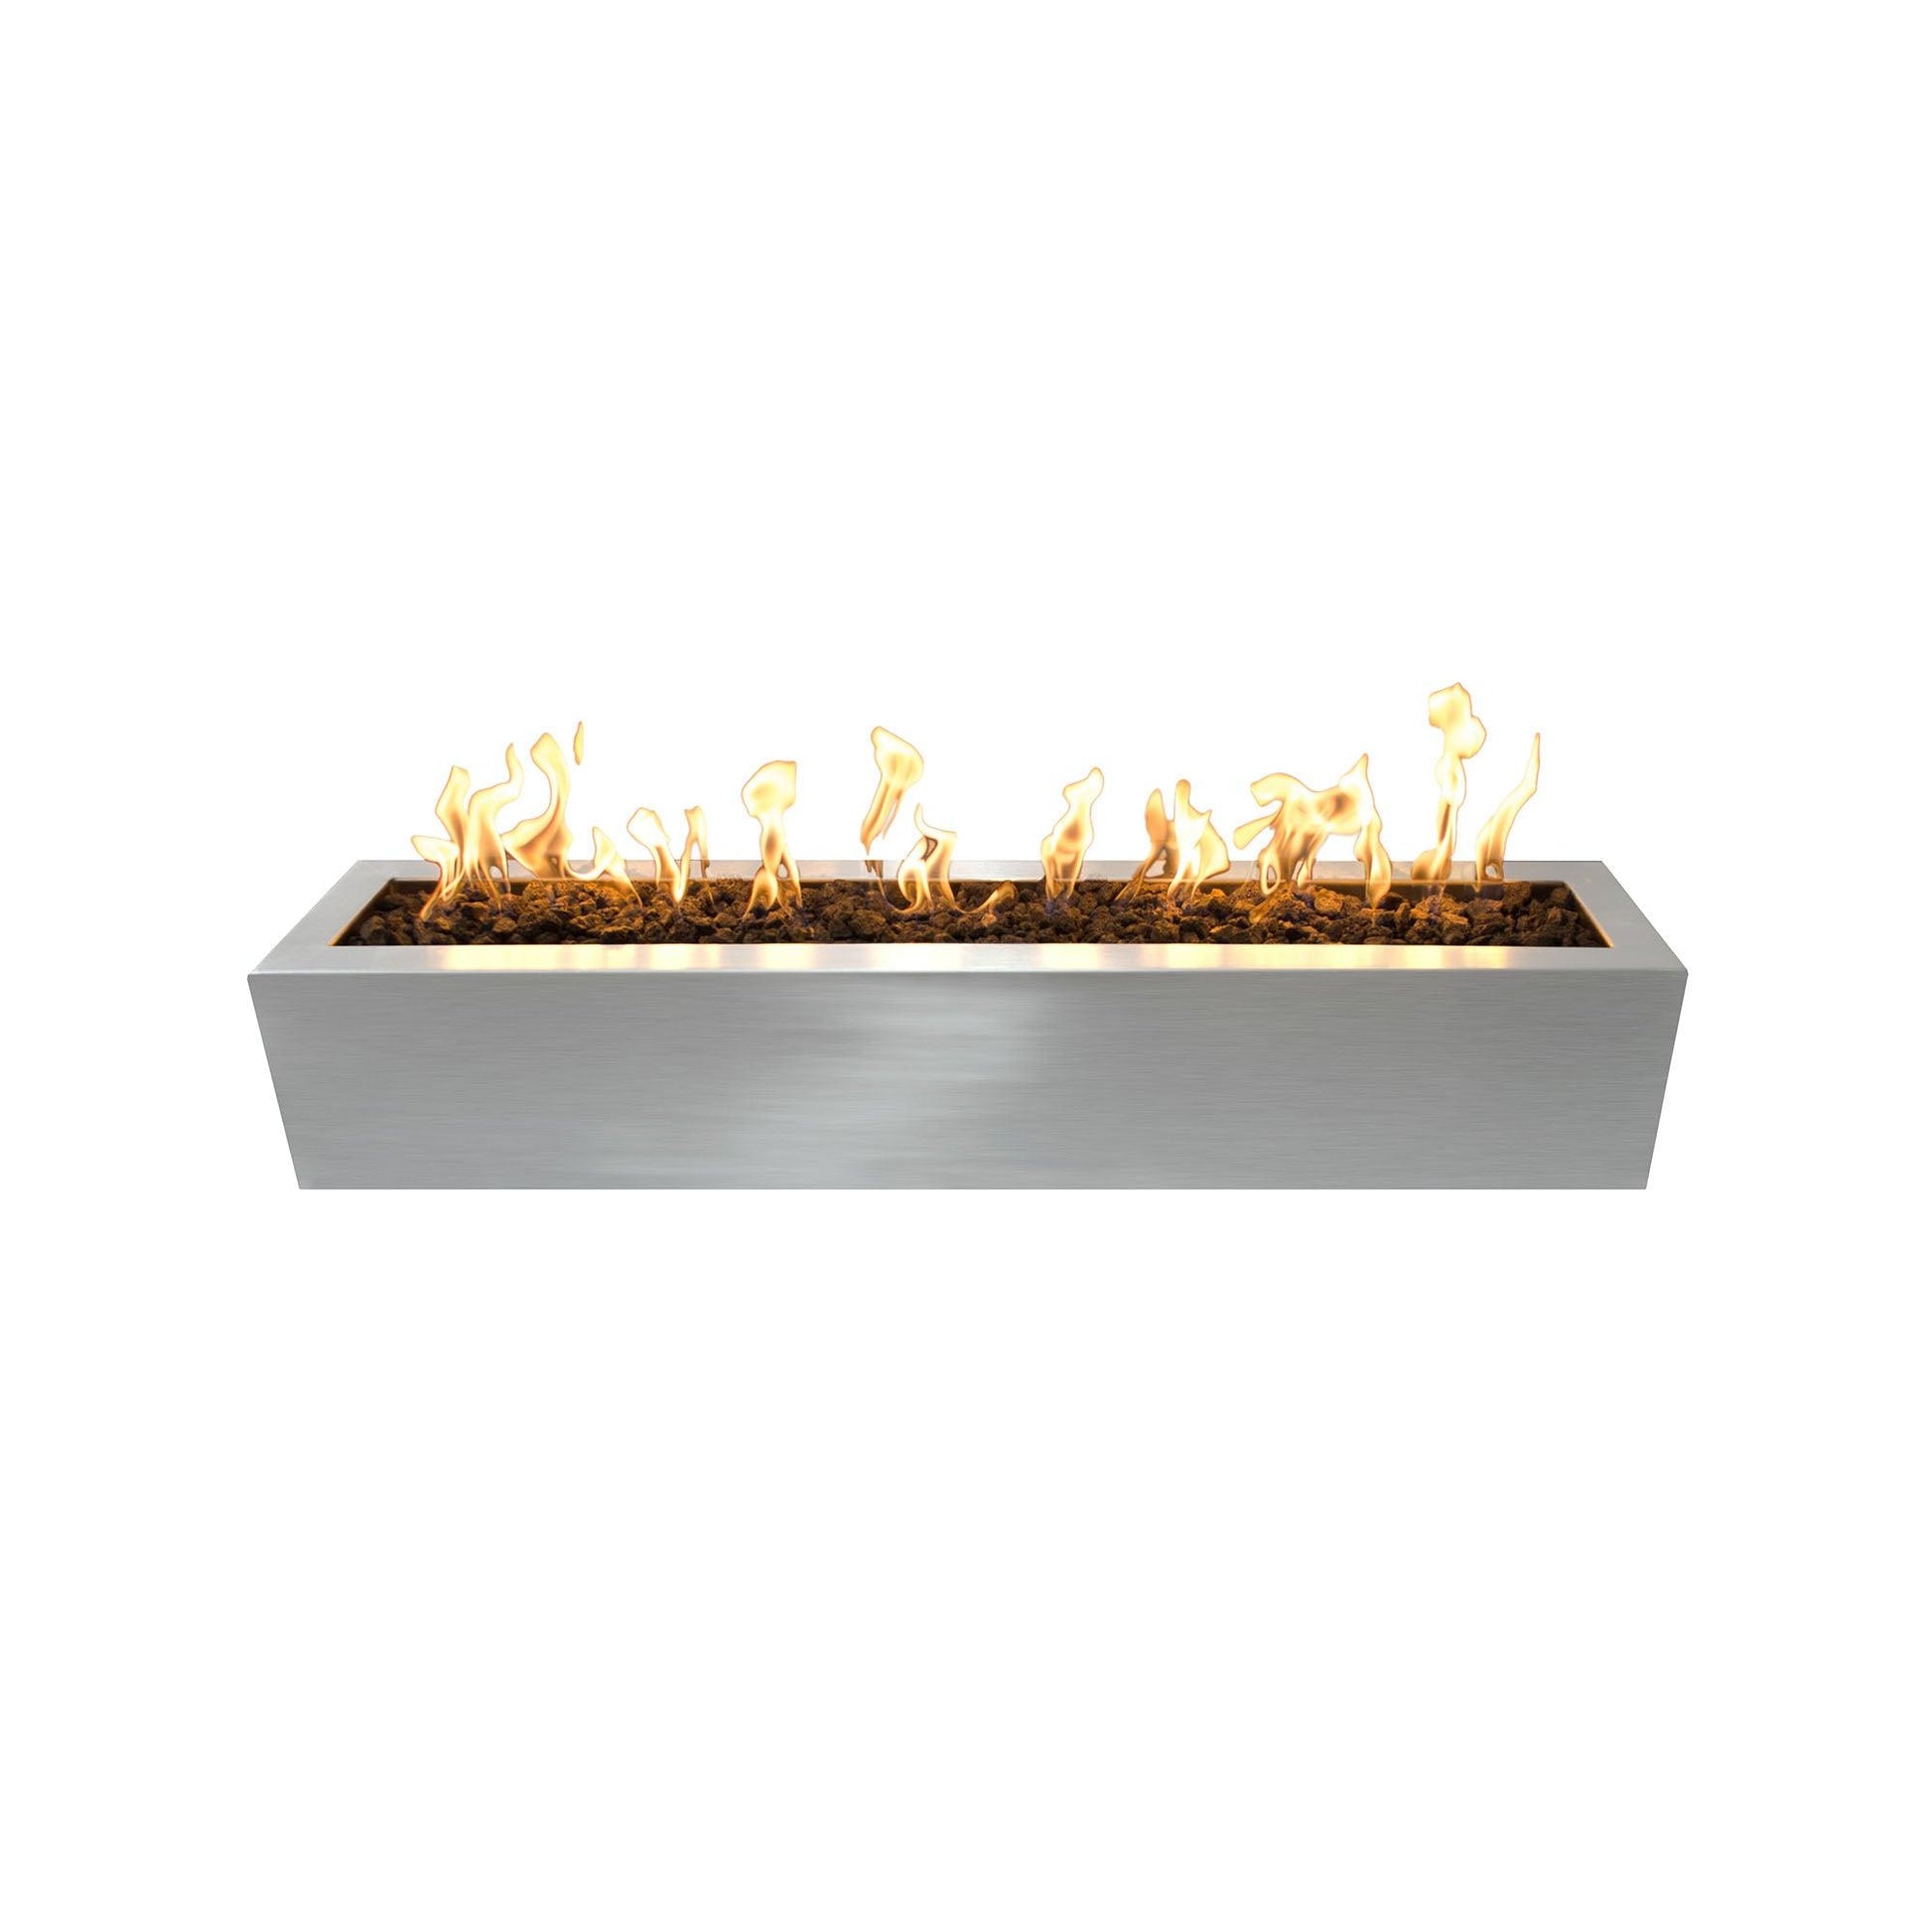 Eaves Fire Pit Stainless Steel